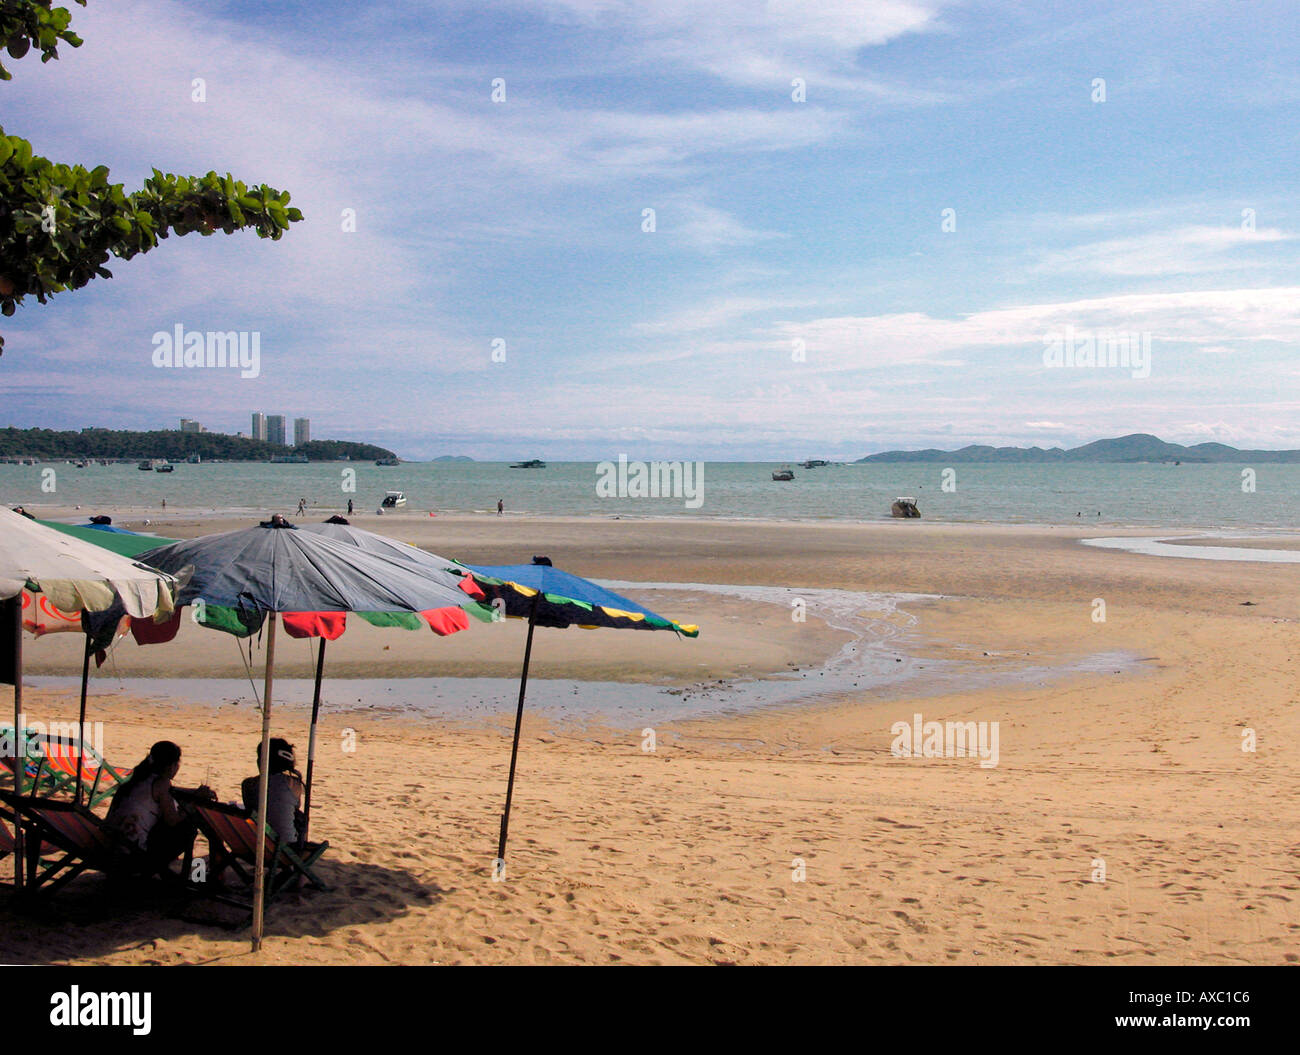 Pattaya Beach with sand and two women seated in deckchairs under umbrellas, Thailand Stock Photo